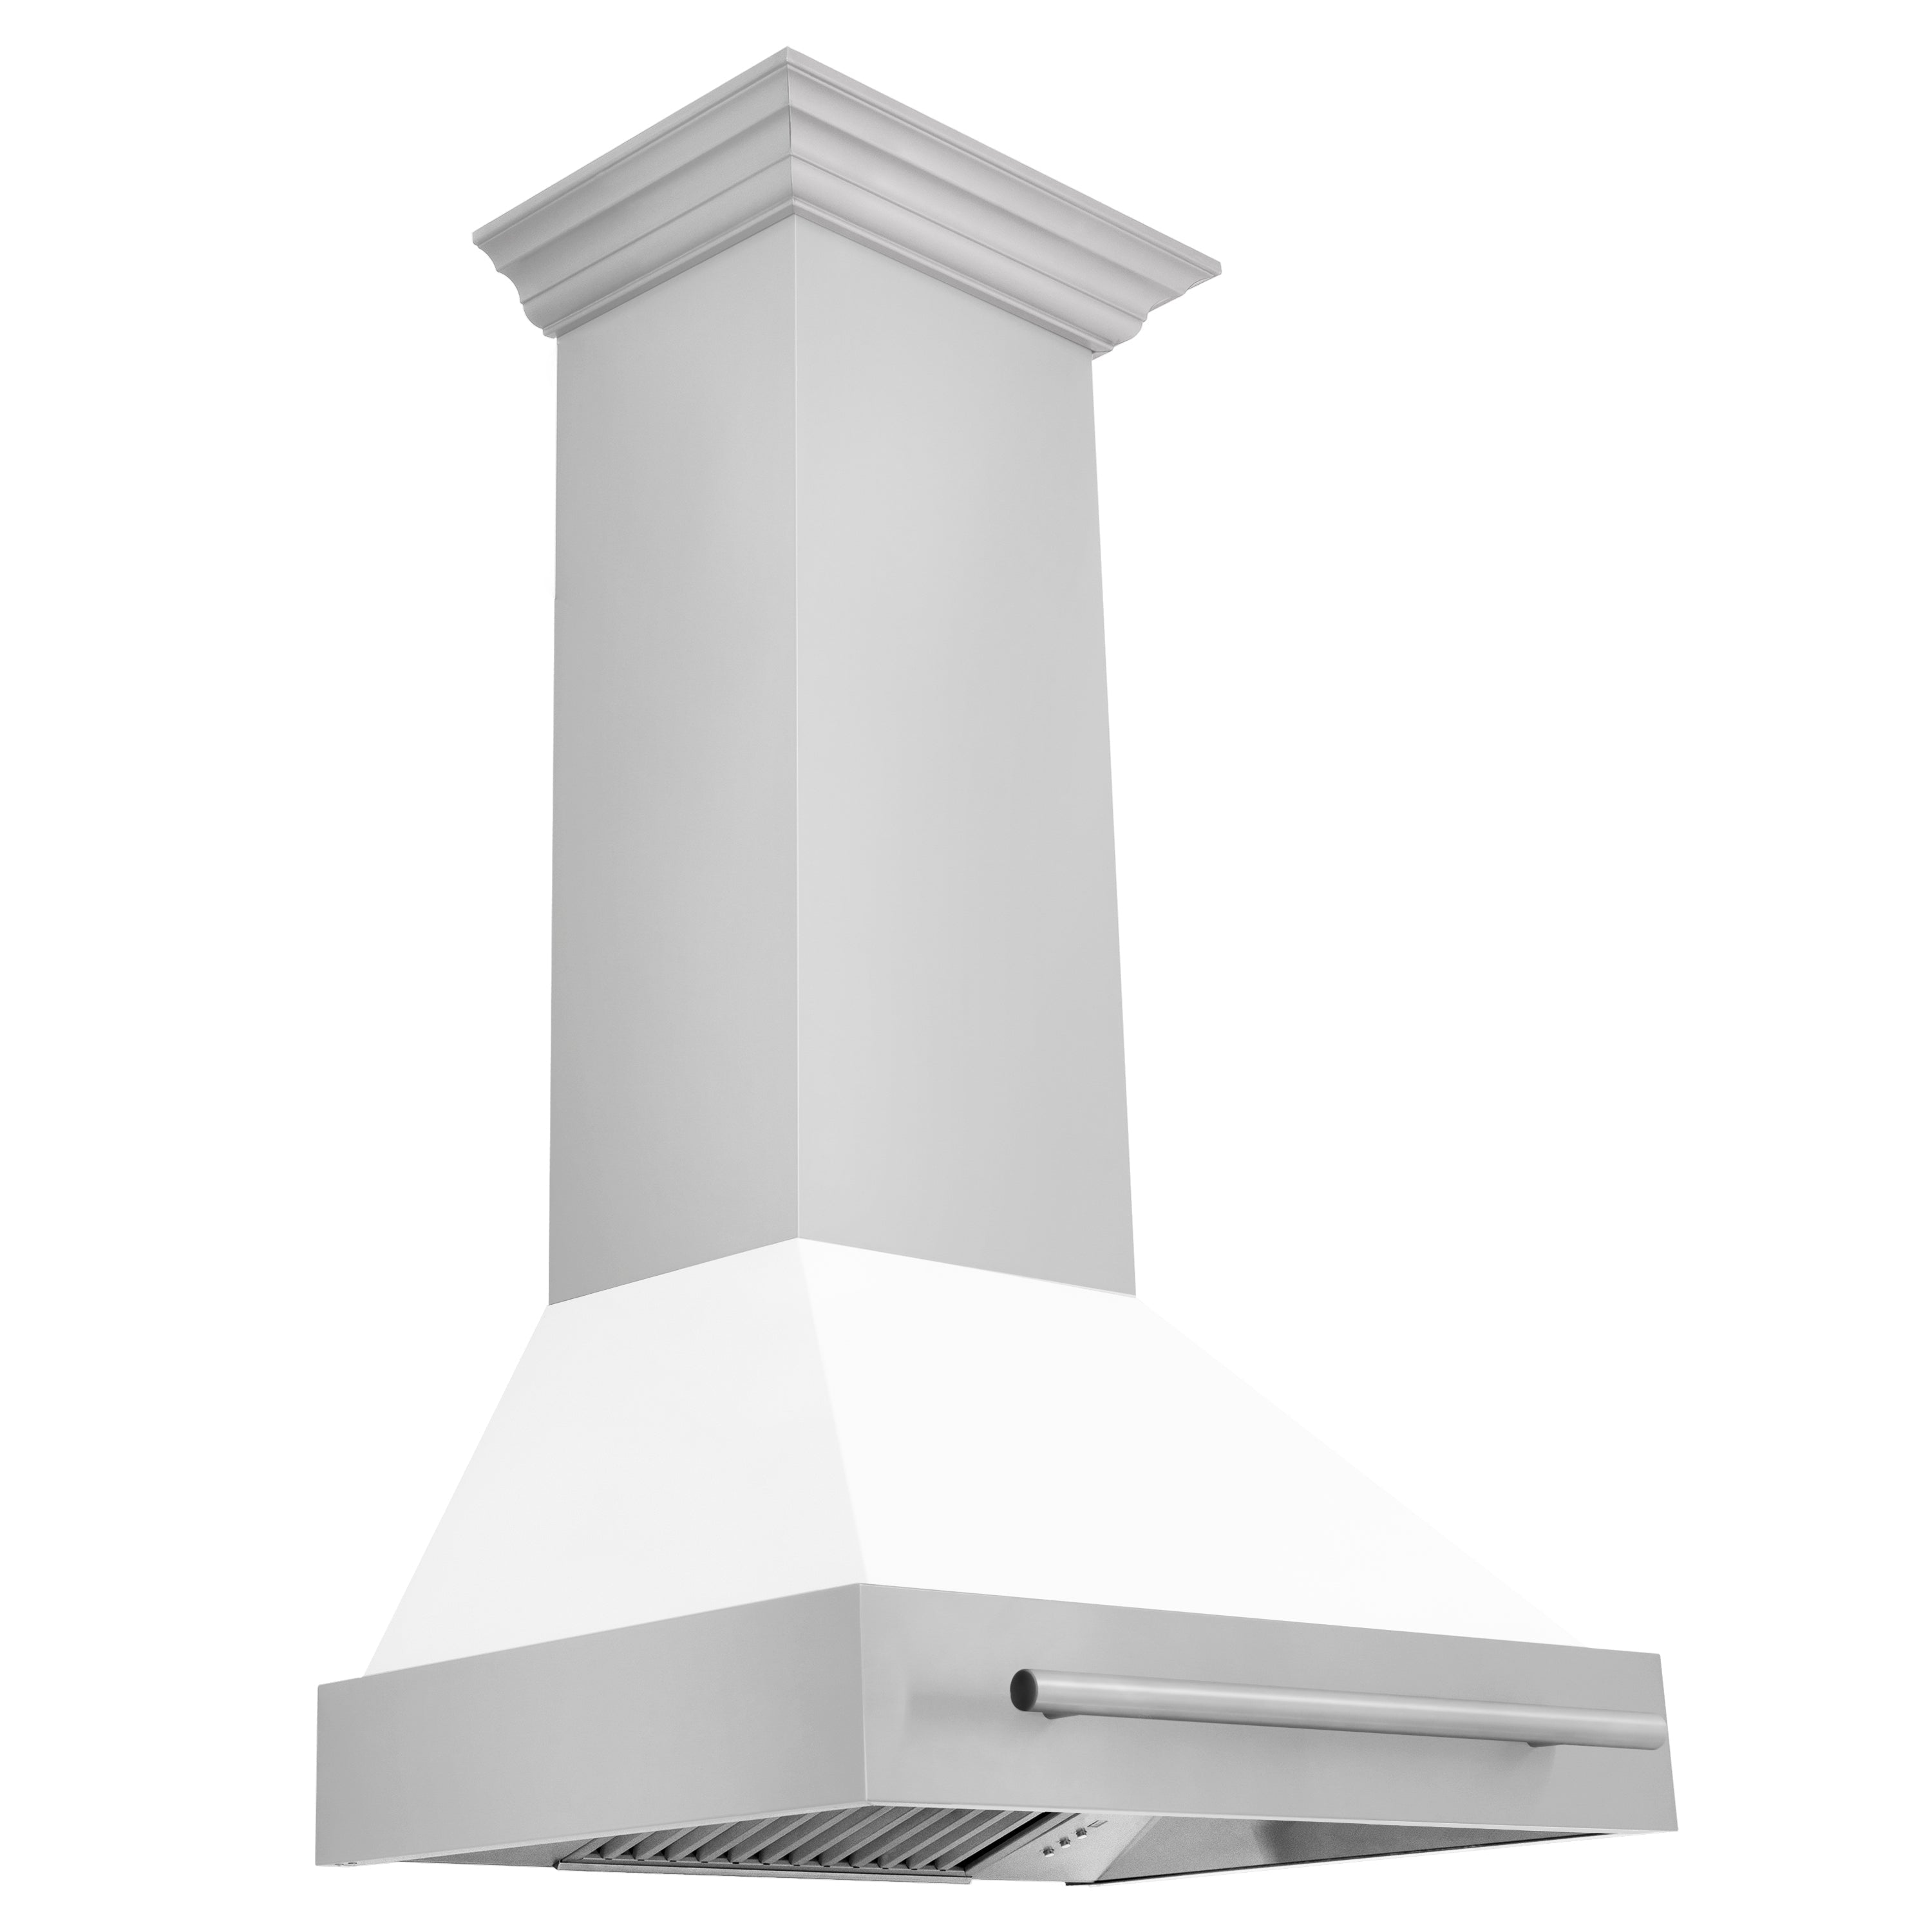 ZLINE 30" Stainless Steel Wall Mount Range Hood with White Matte Shell and Stainless Steel Handle (8654STX-WM-30)